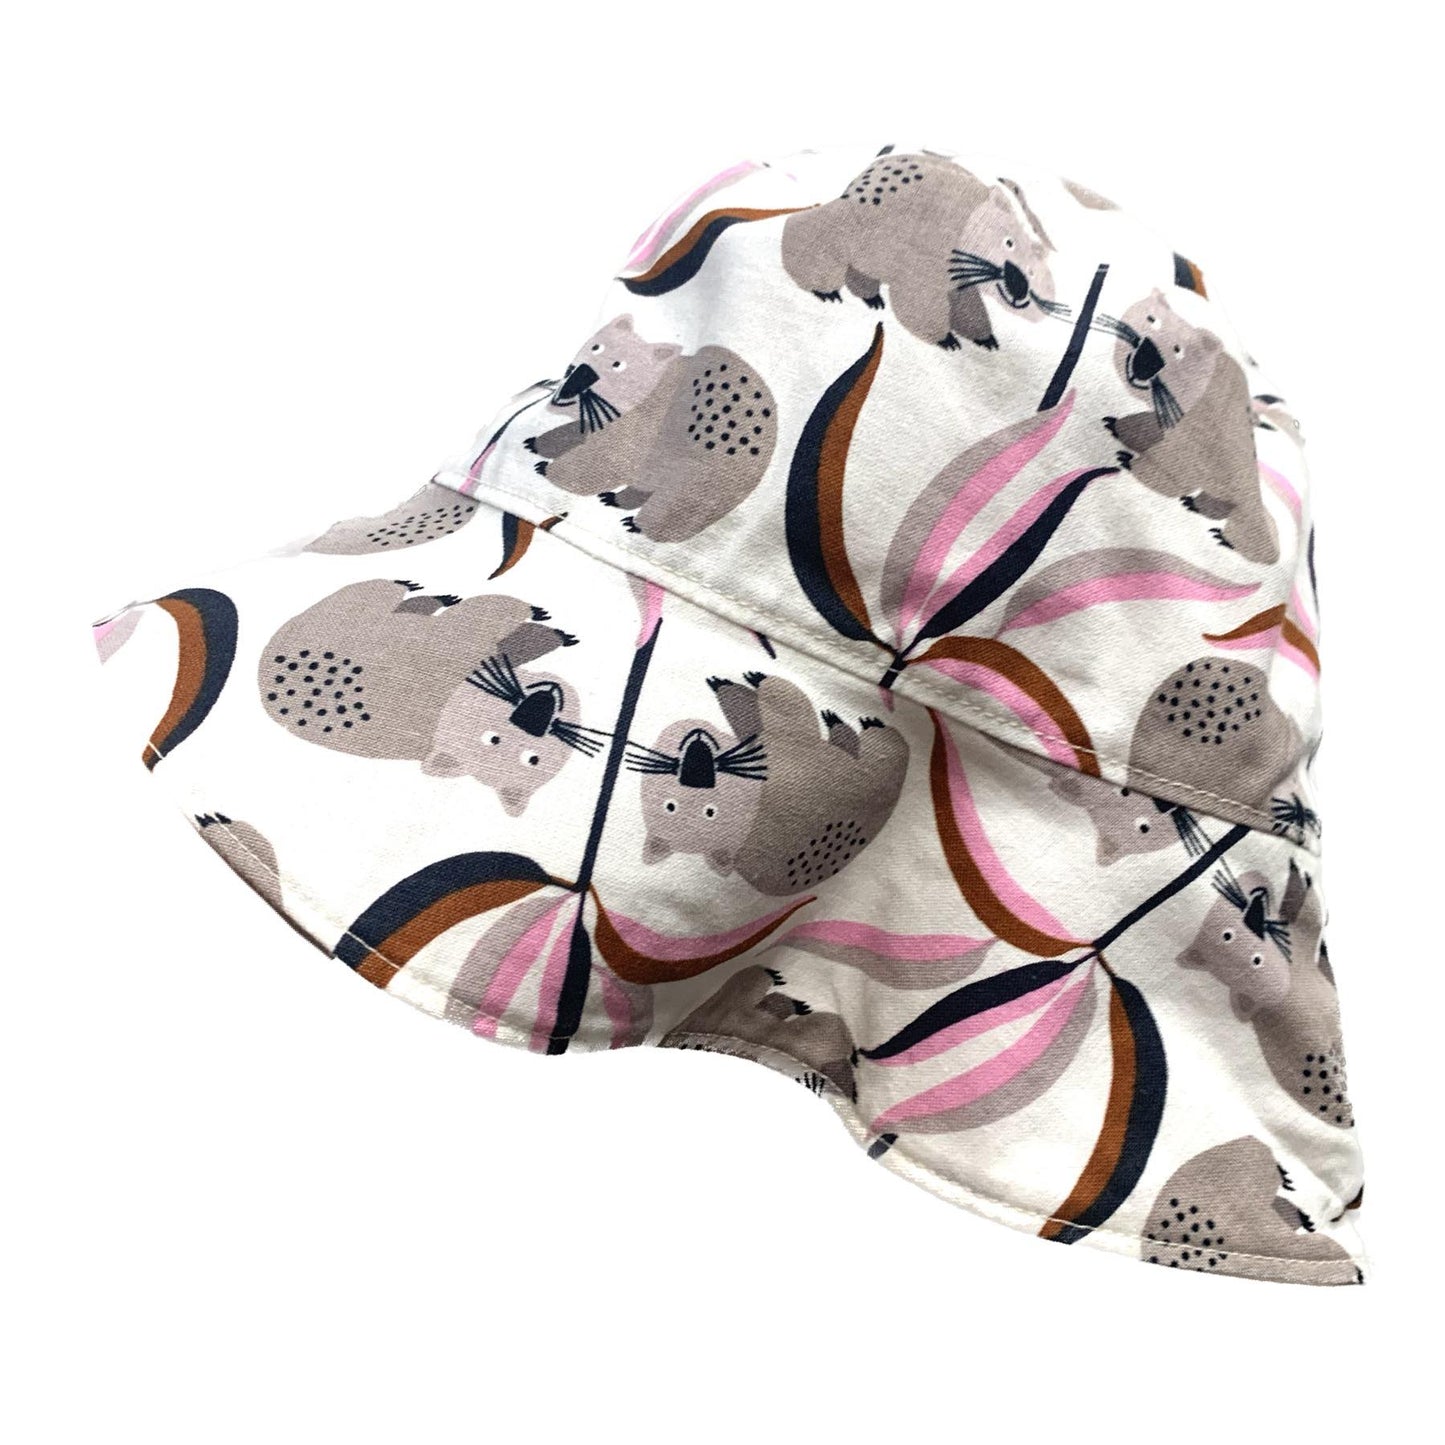 Teacups n Quilts- White Wombats Fabric Hat - Adult Size